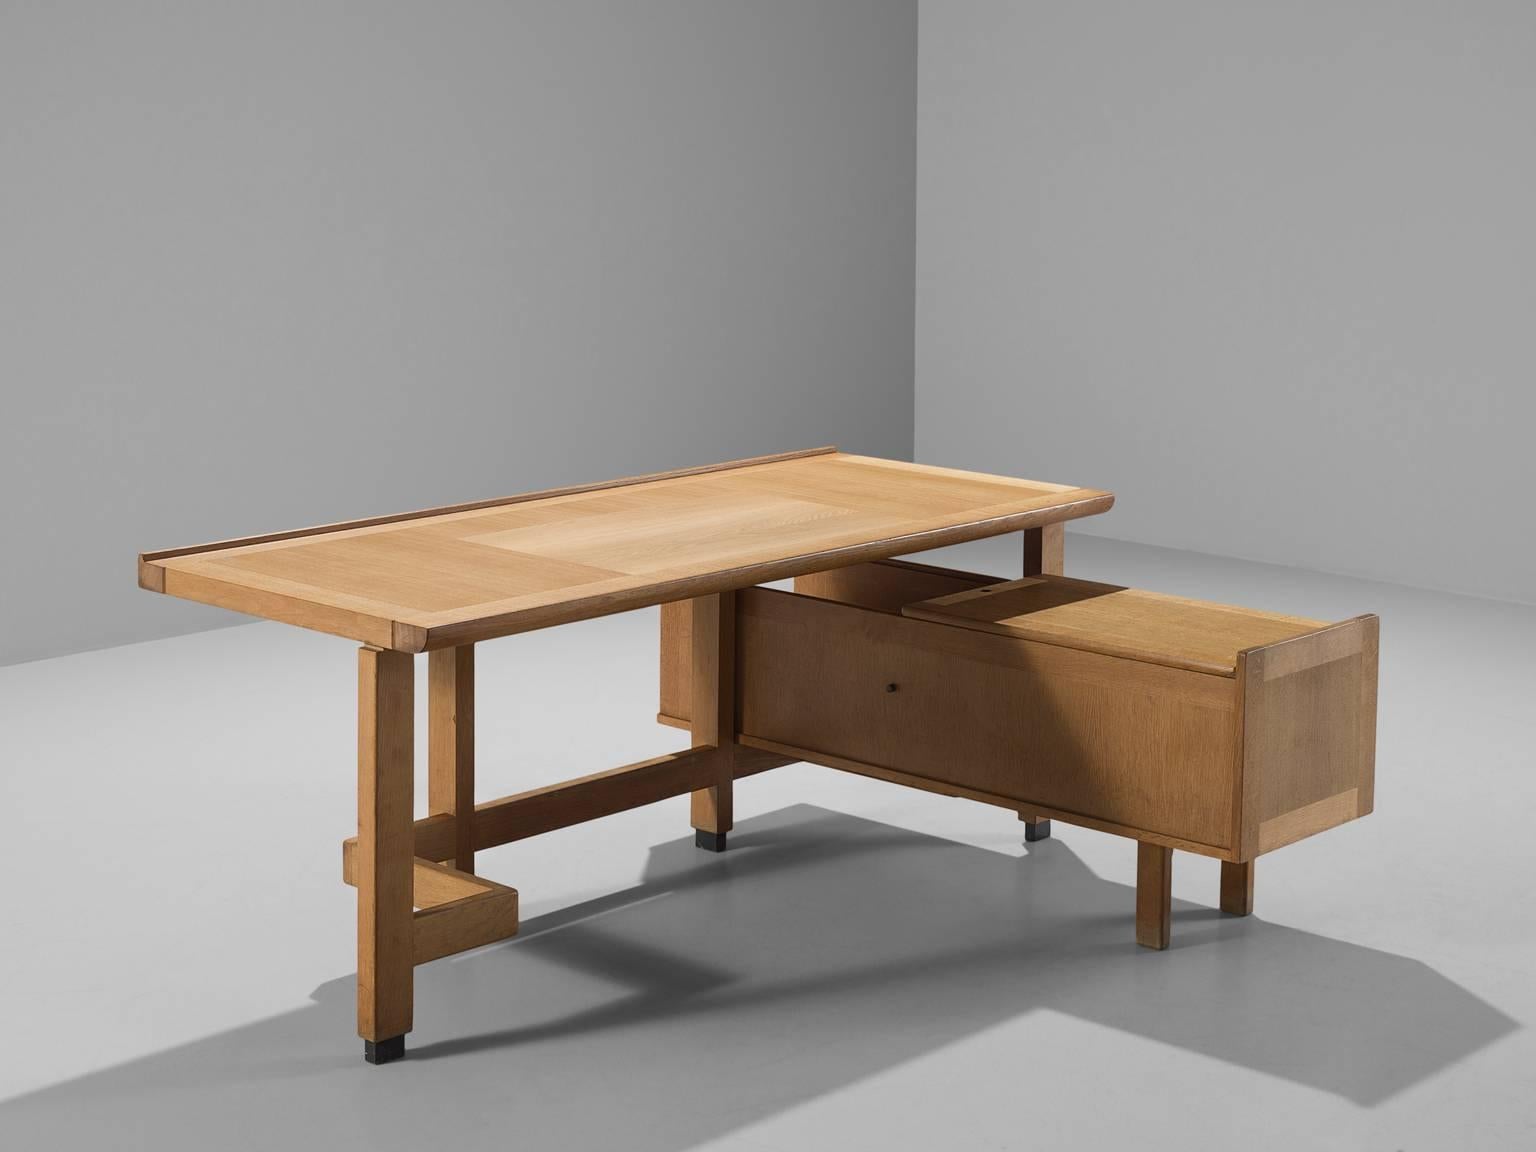 Corner desk in oak by Guillerme et Chambron, France, 1960s. 

Corner desk by French designer duo Guillerme and Chambron. This executive desk shows the fine craftsmanship and line work that characterizes the work of this designer duo. The stained oak